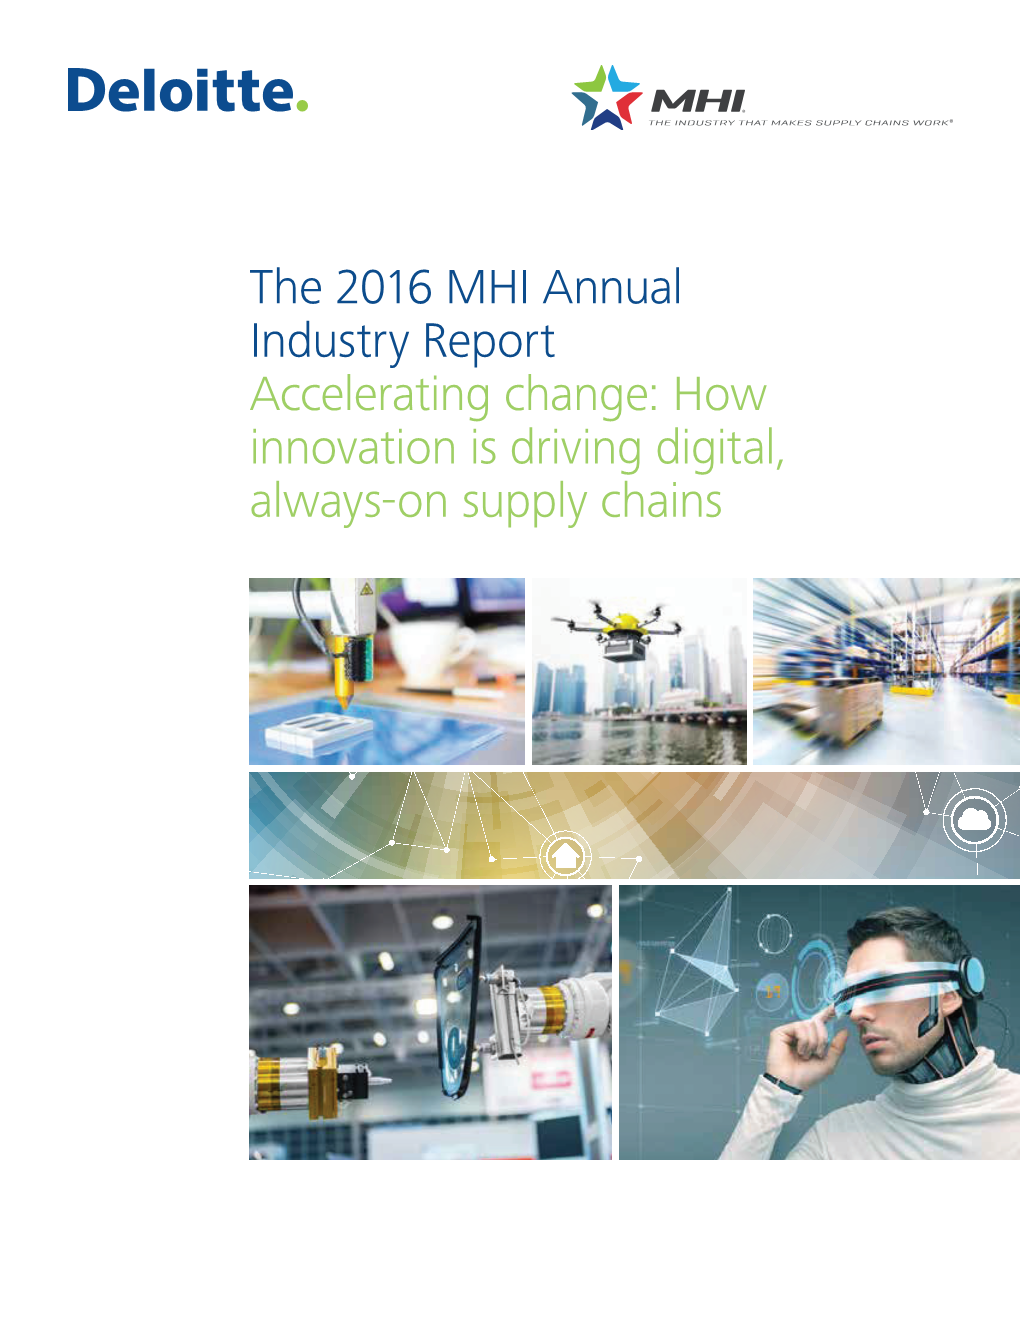 The 2016 MHI Annual Industry Report Accelerating Change: How Innovation Is Driving Digital, Always-On Supply Chains Table of Contents